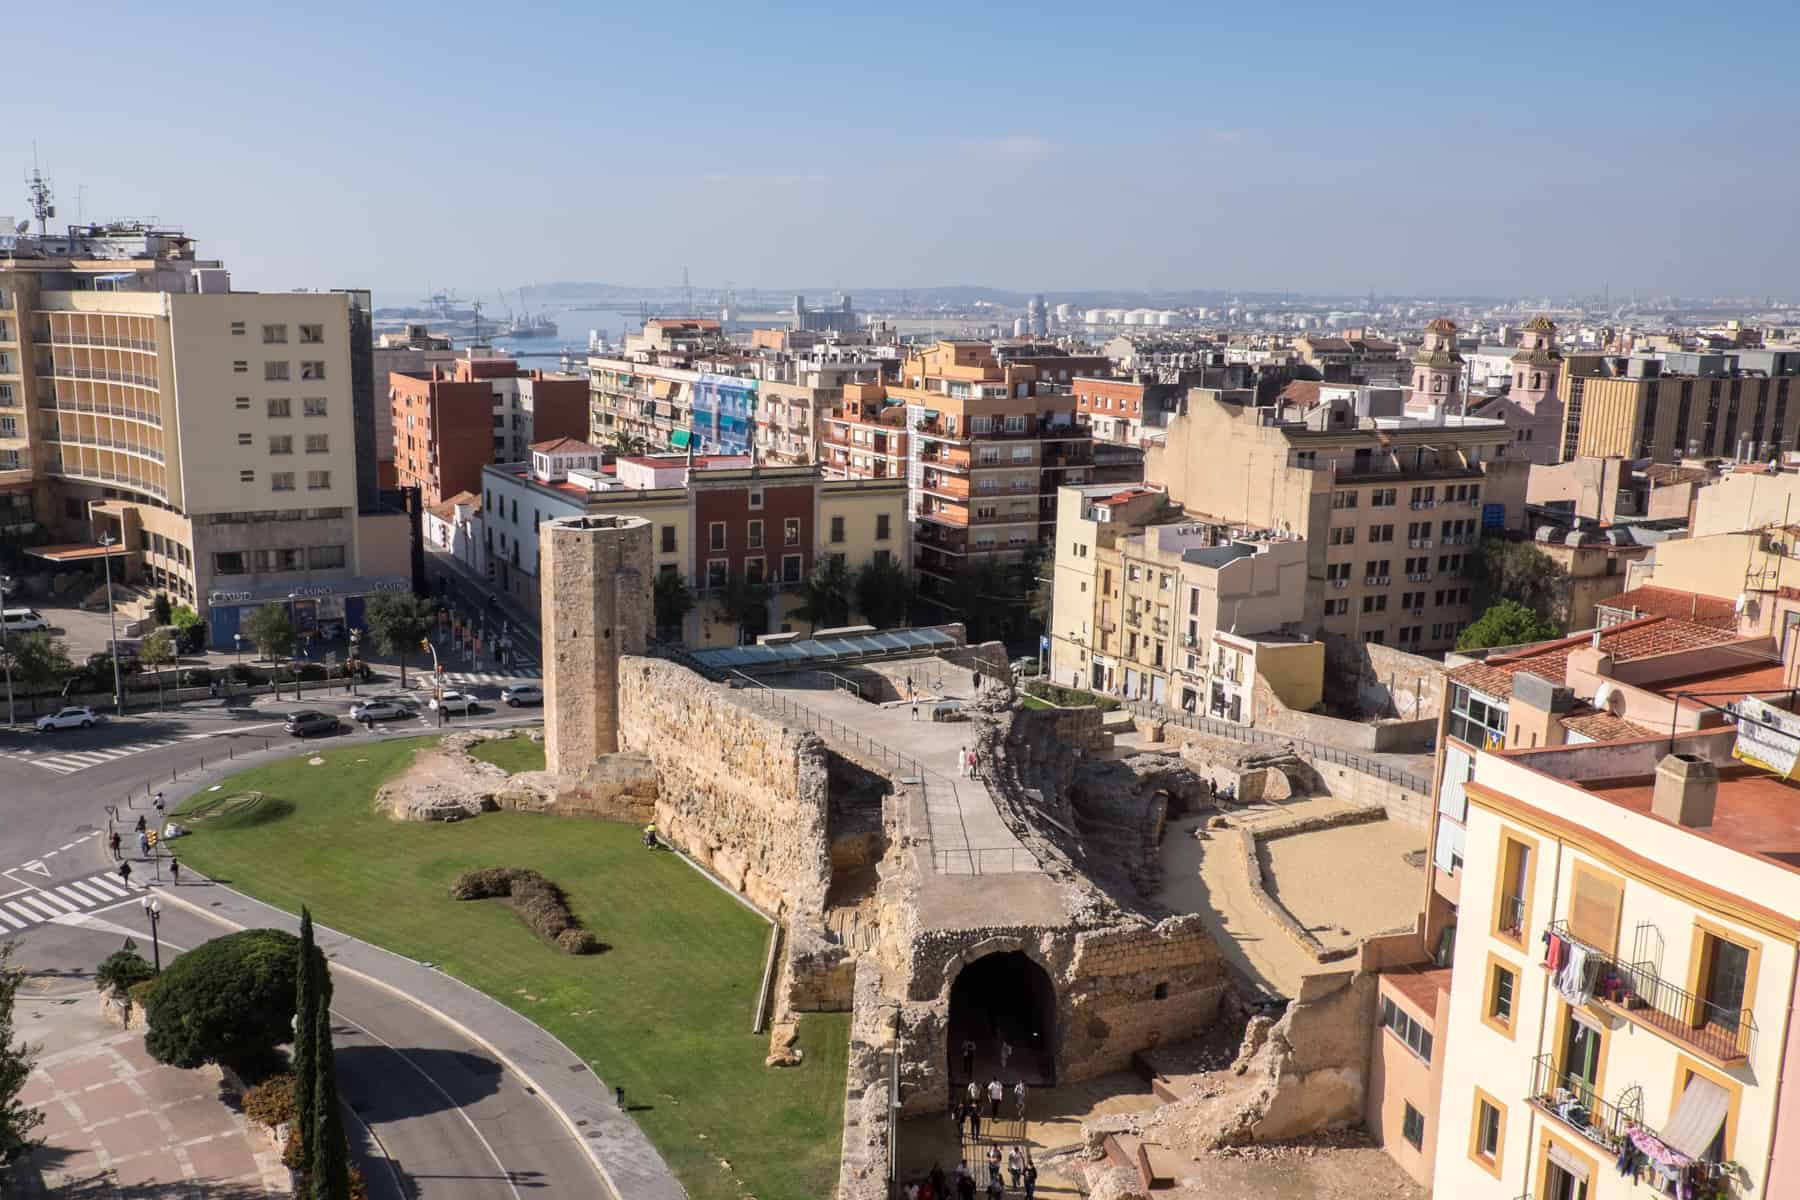 Ariel View of the ruins of the Roman Circus in Tarragona – old stone archtiecture surrounded by the modern buildings of today's city